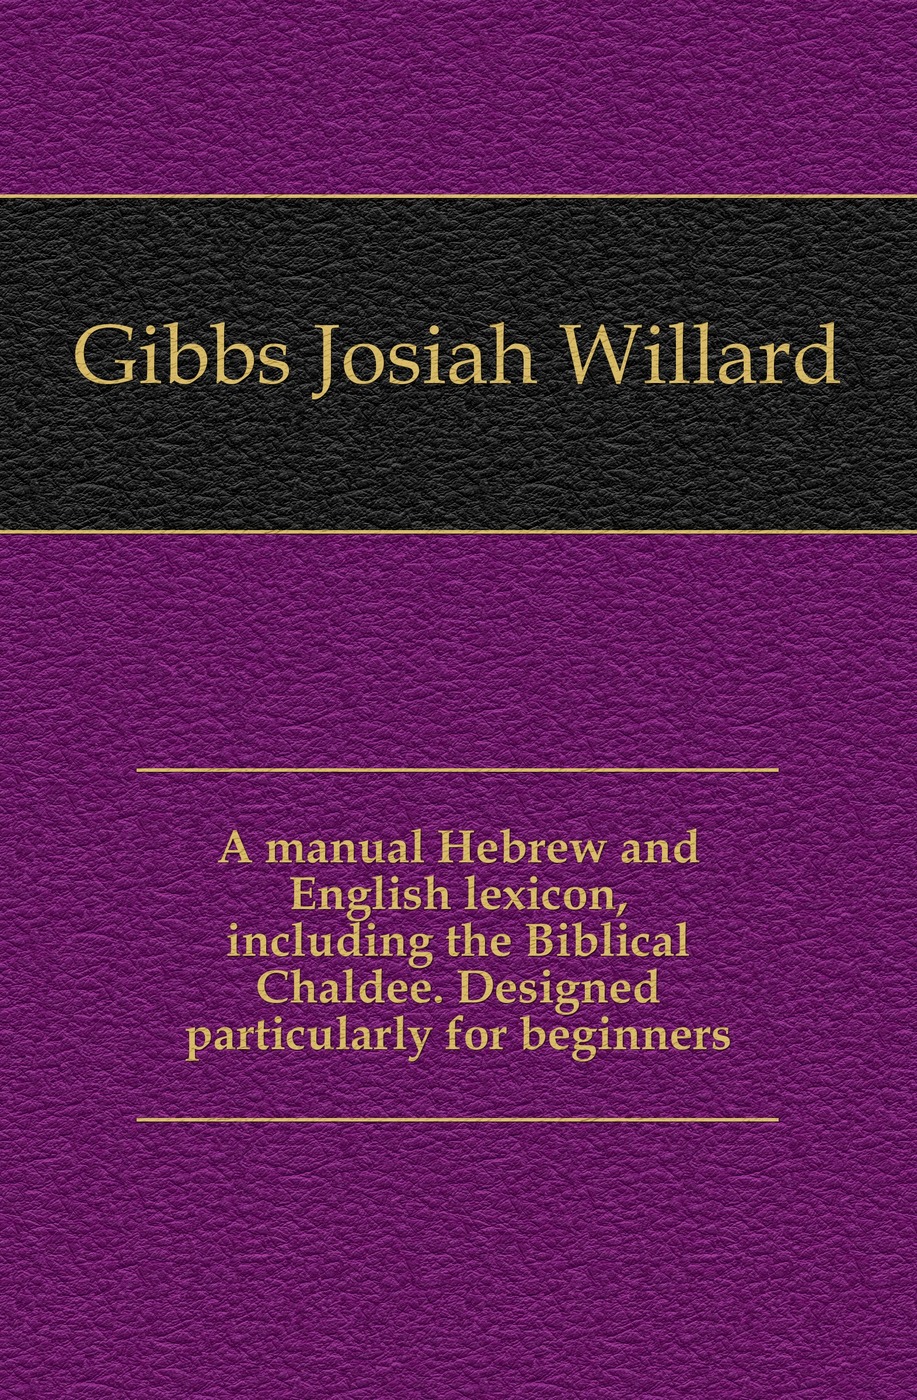 A manual Hebrew and English lexicon, including the Biblical Chaldee. Designed particularly for beginners